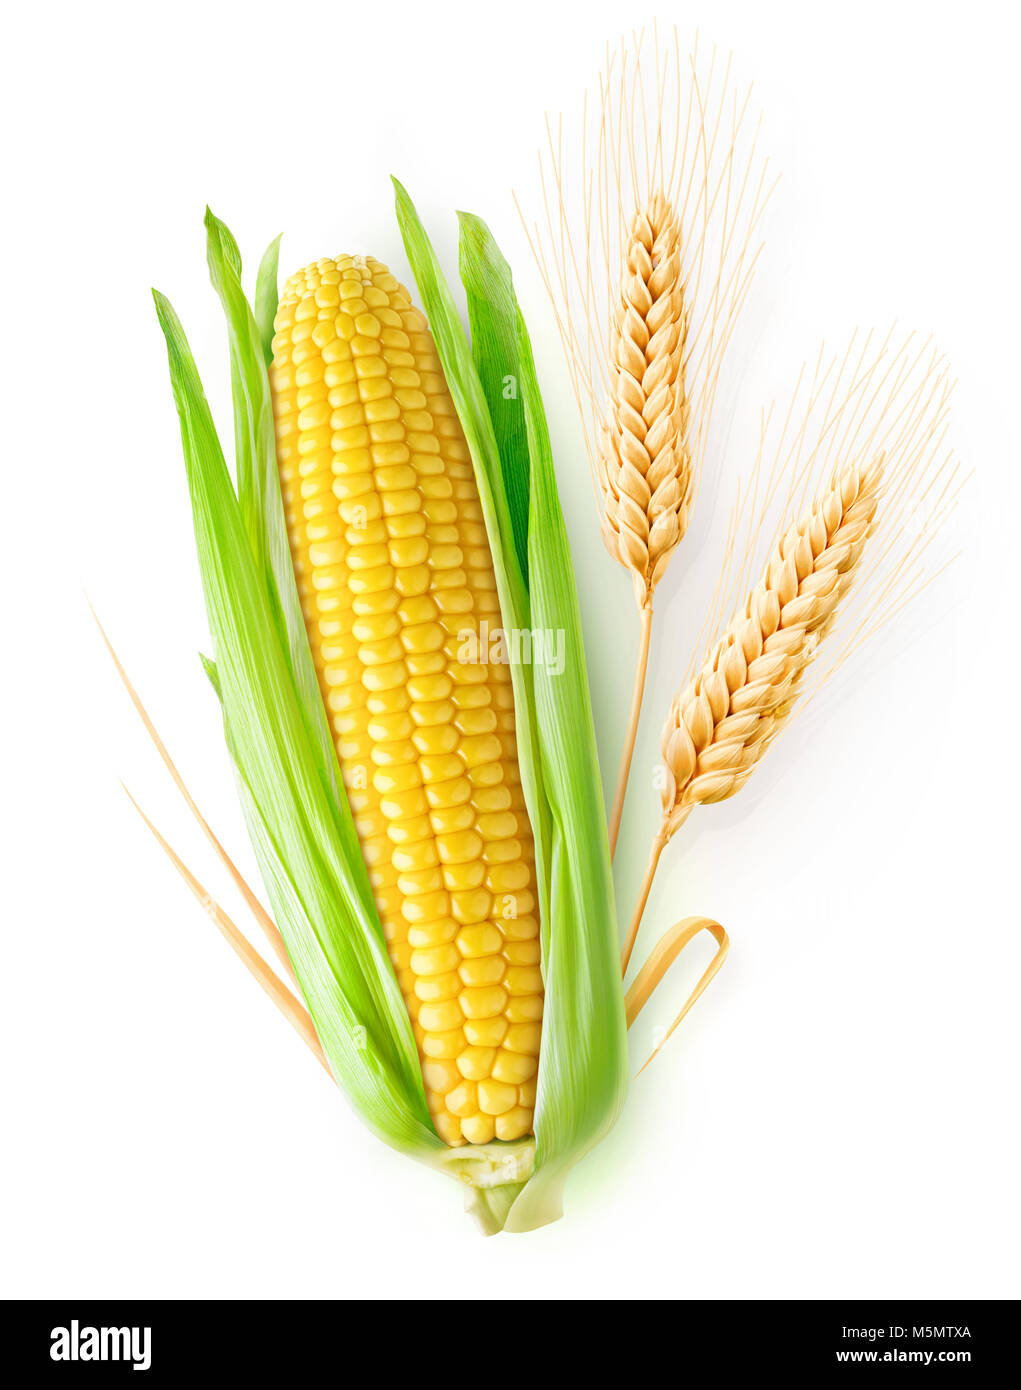 Isolated cereals. One ear of corn and two ears of wheat with leaves isolated on white background with clipping path Stock Photo